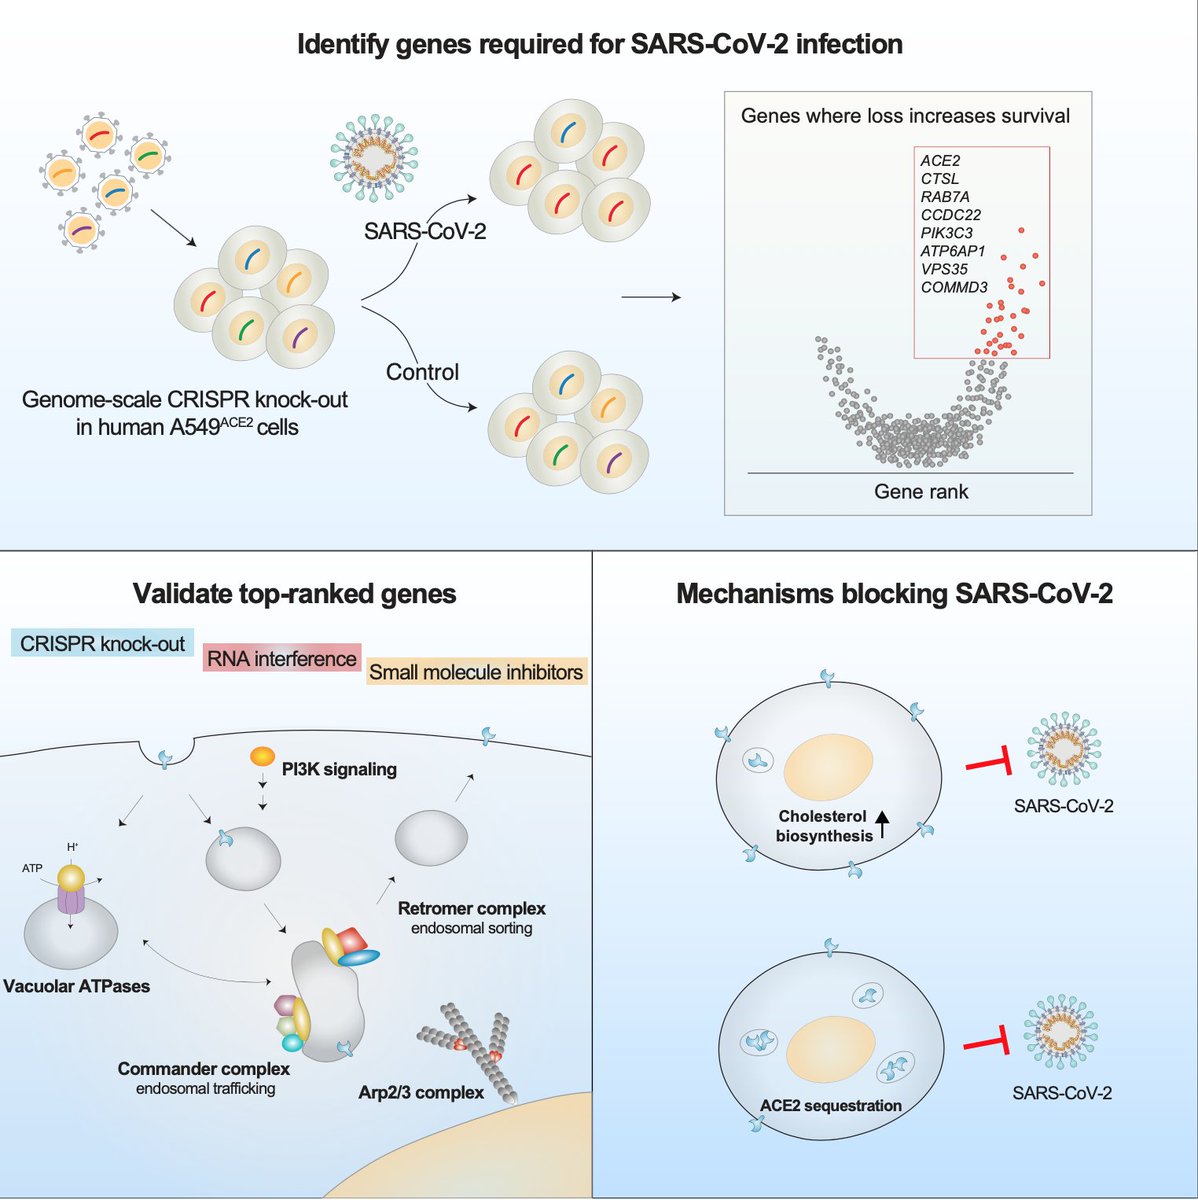 As promised, here’s an overview of our study to find host factors required for SARS-CoV-2 infection in human cells. We use a genome-wide CRISPR screen to identify genes (& key mechanisms) that might be therapeutically targetable to prevent viral infection.